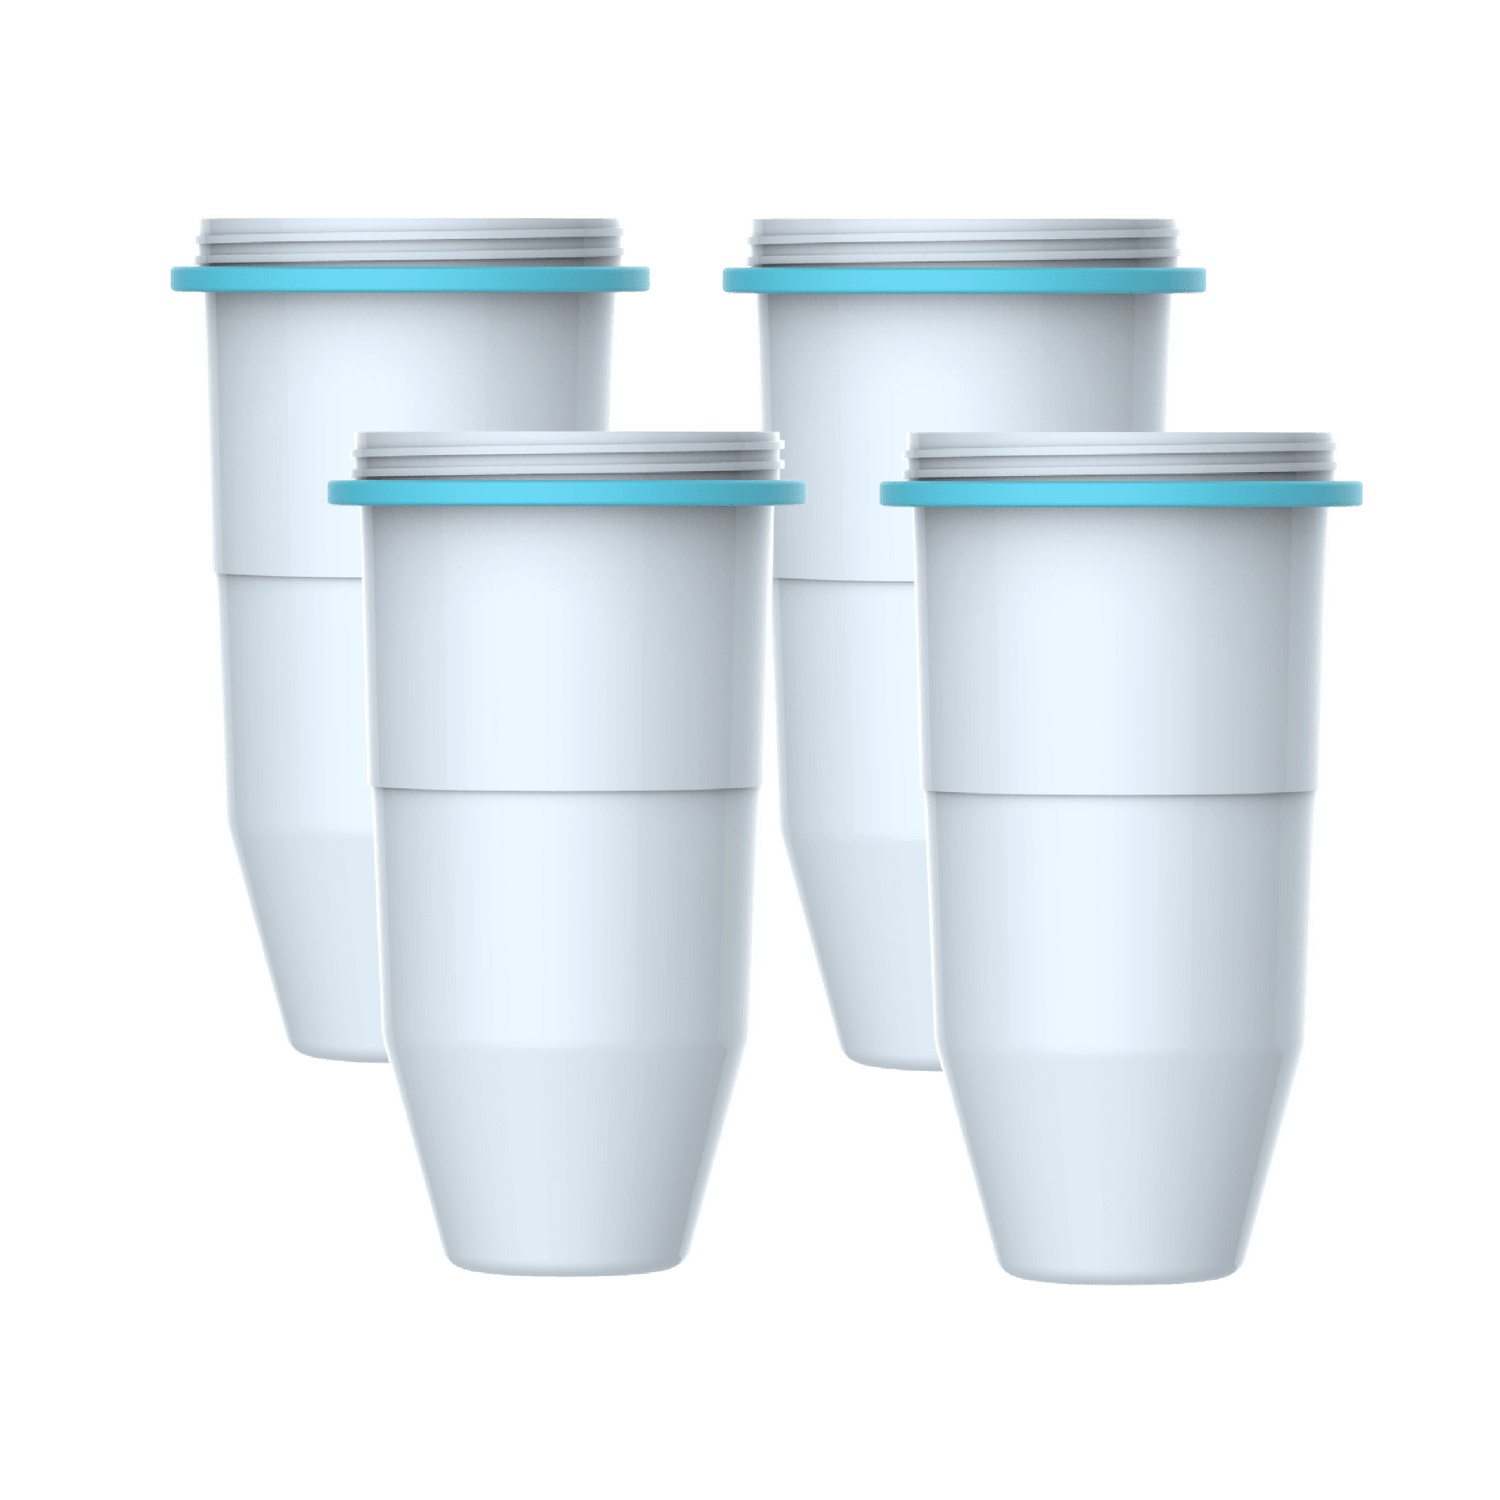 Zerowater filter replacement by Waterdrop